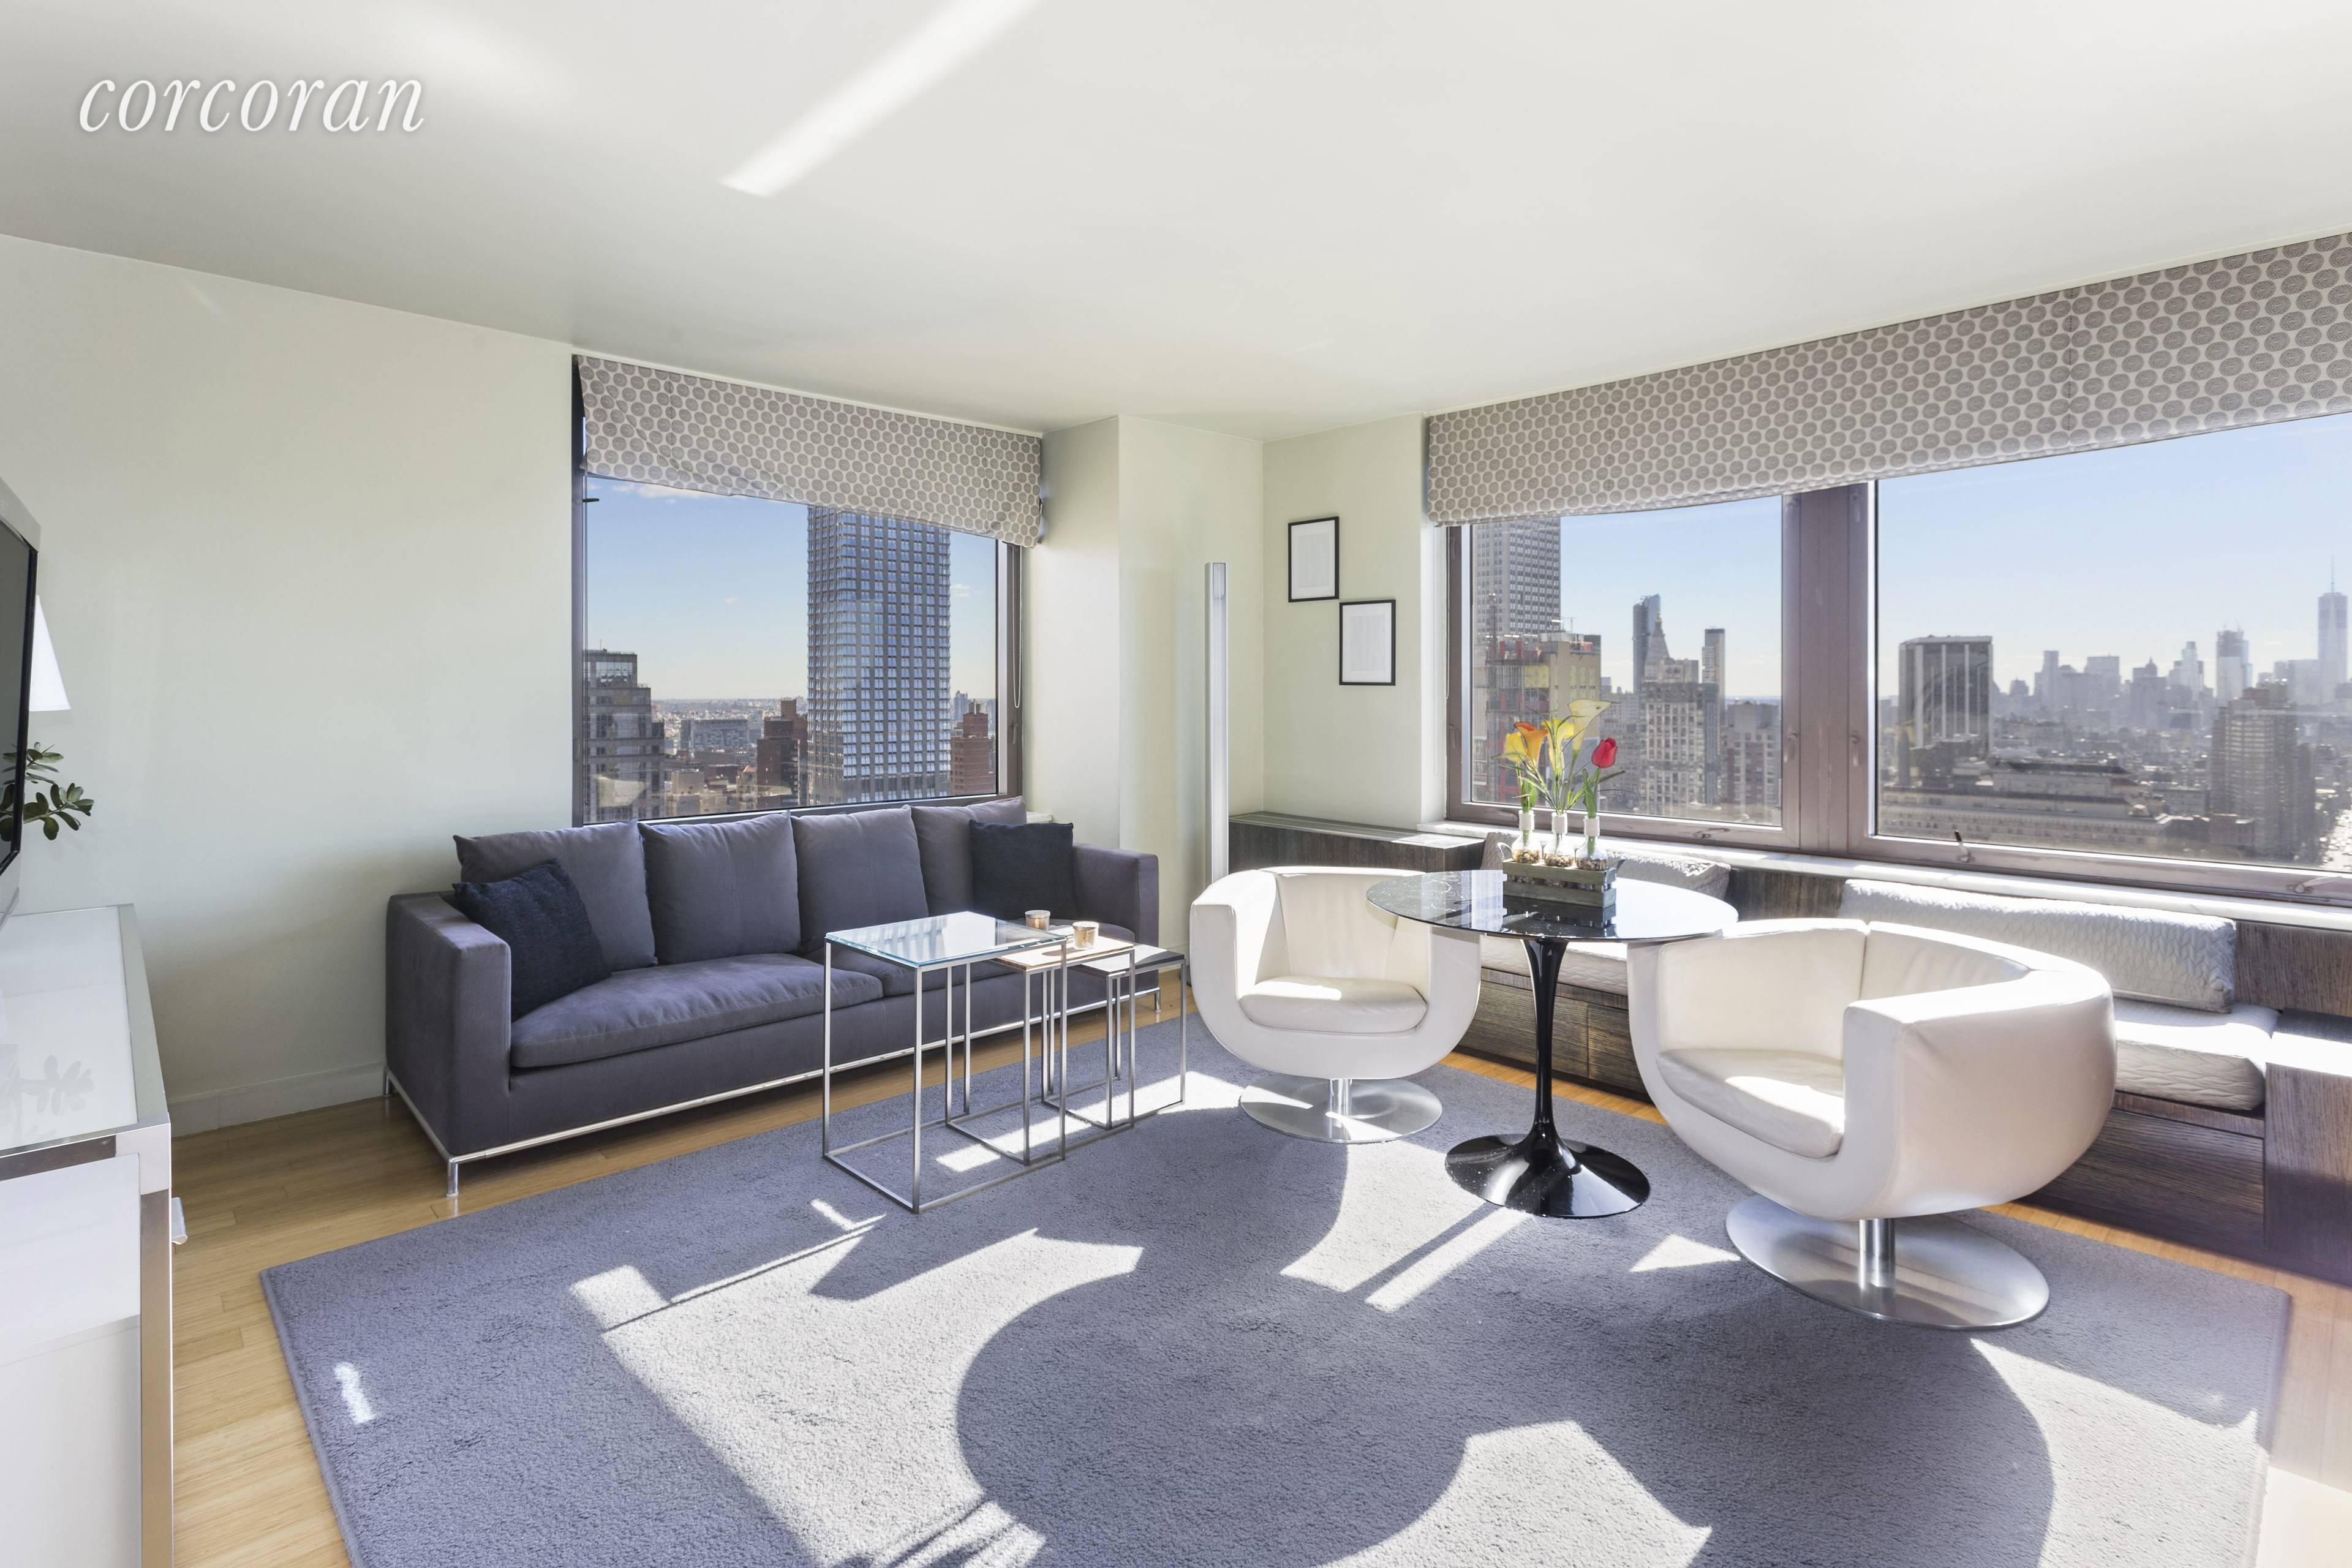 Sun blasted Bryant Park Alcove Studio FULLY FURNISHED Apartment 42 G is a splendid high floor customized, over sized corner unit alcove studio with magnificent unobstructed S E W views ...